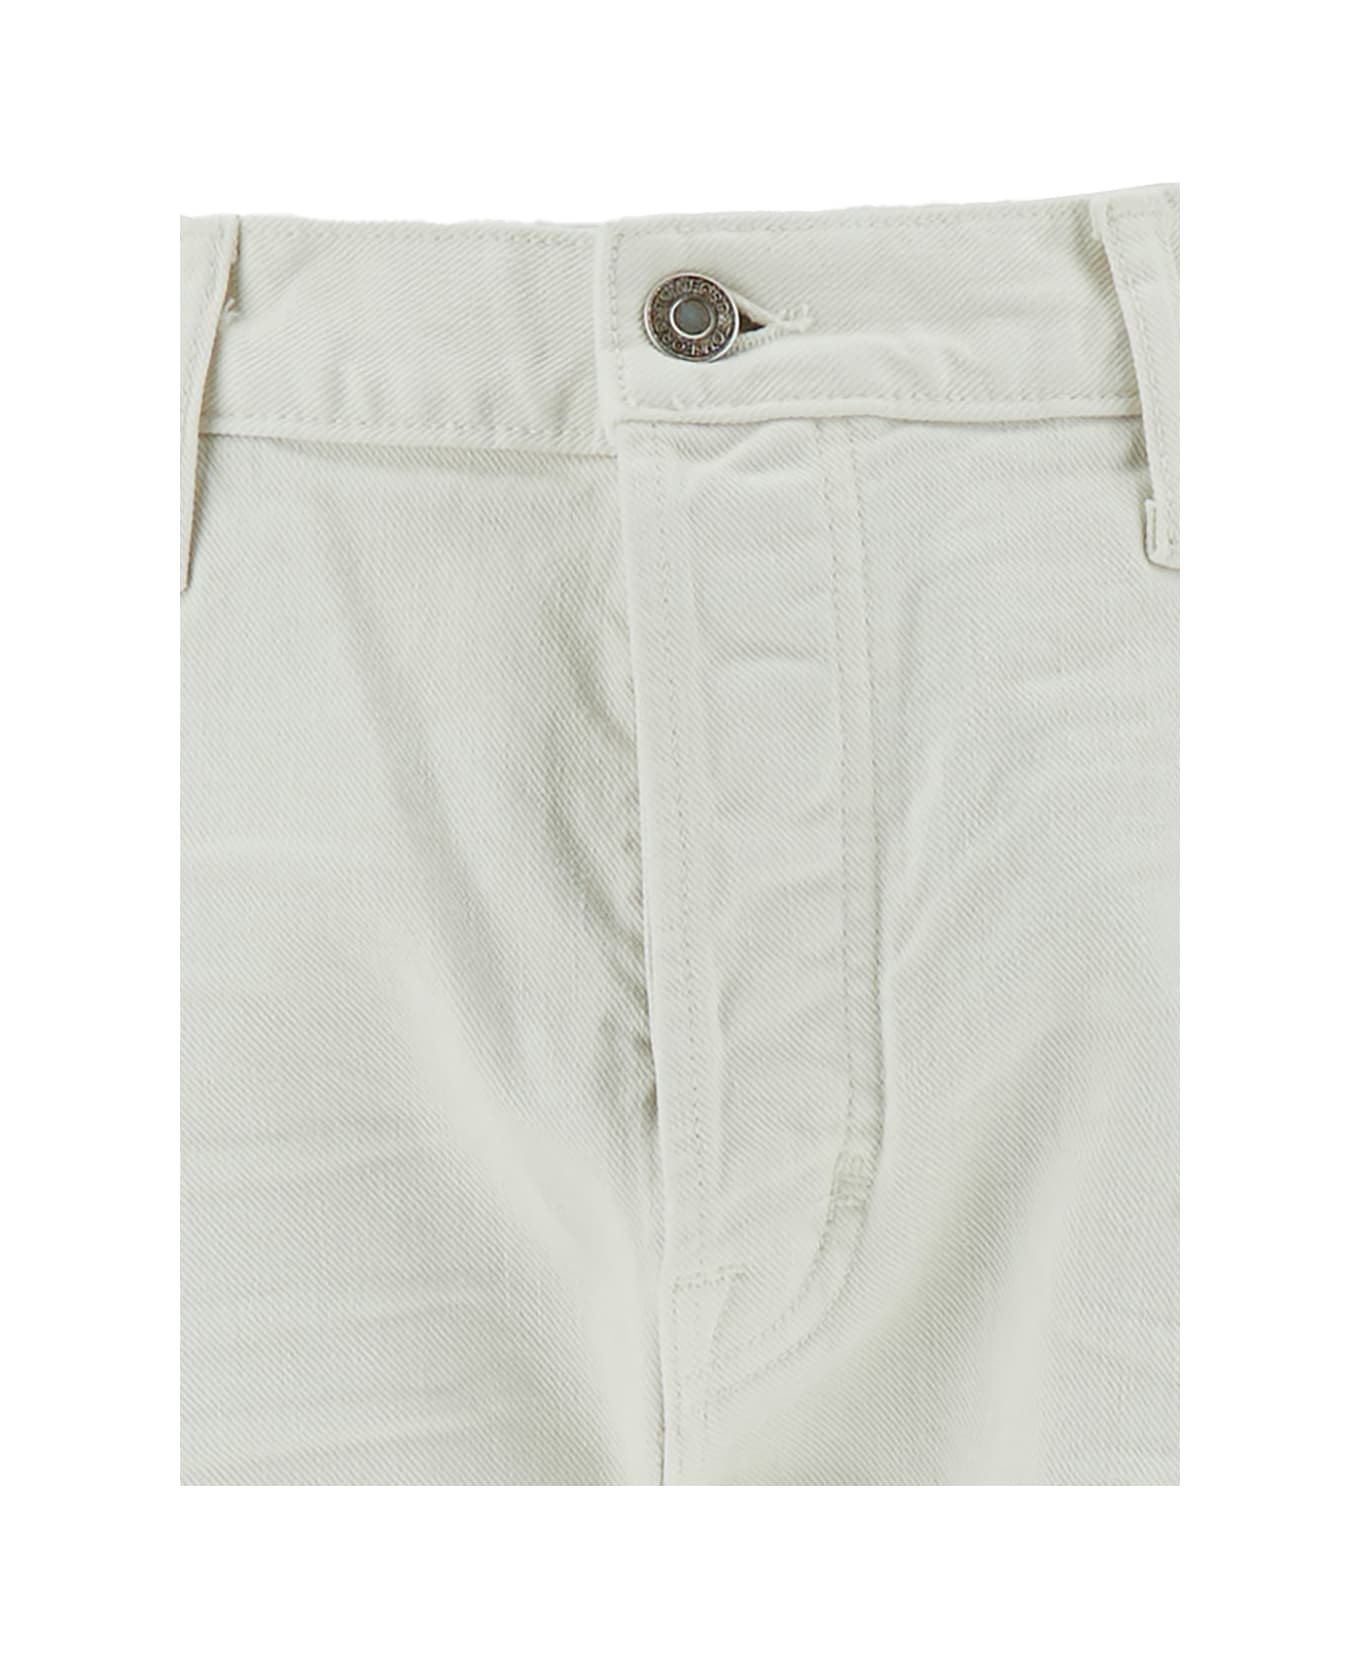 Tom Ford White Slim Five-pocket Style Jeans With Branded Button In Stretch Cotton Denim Man - White デニム